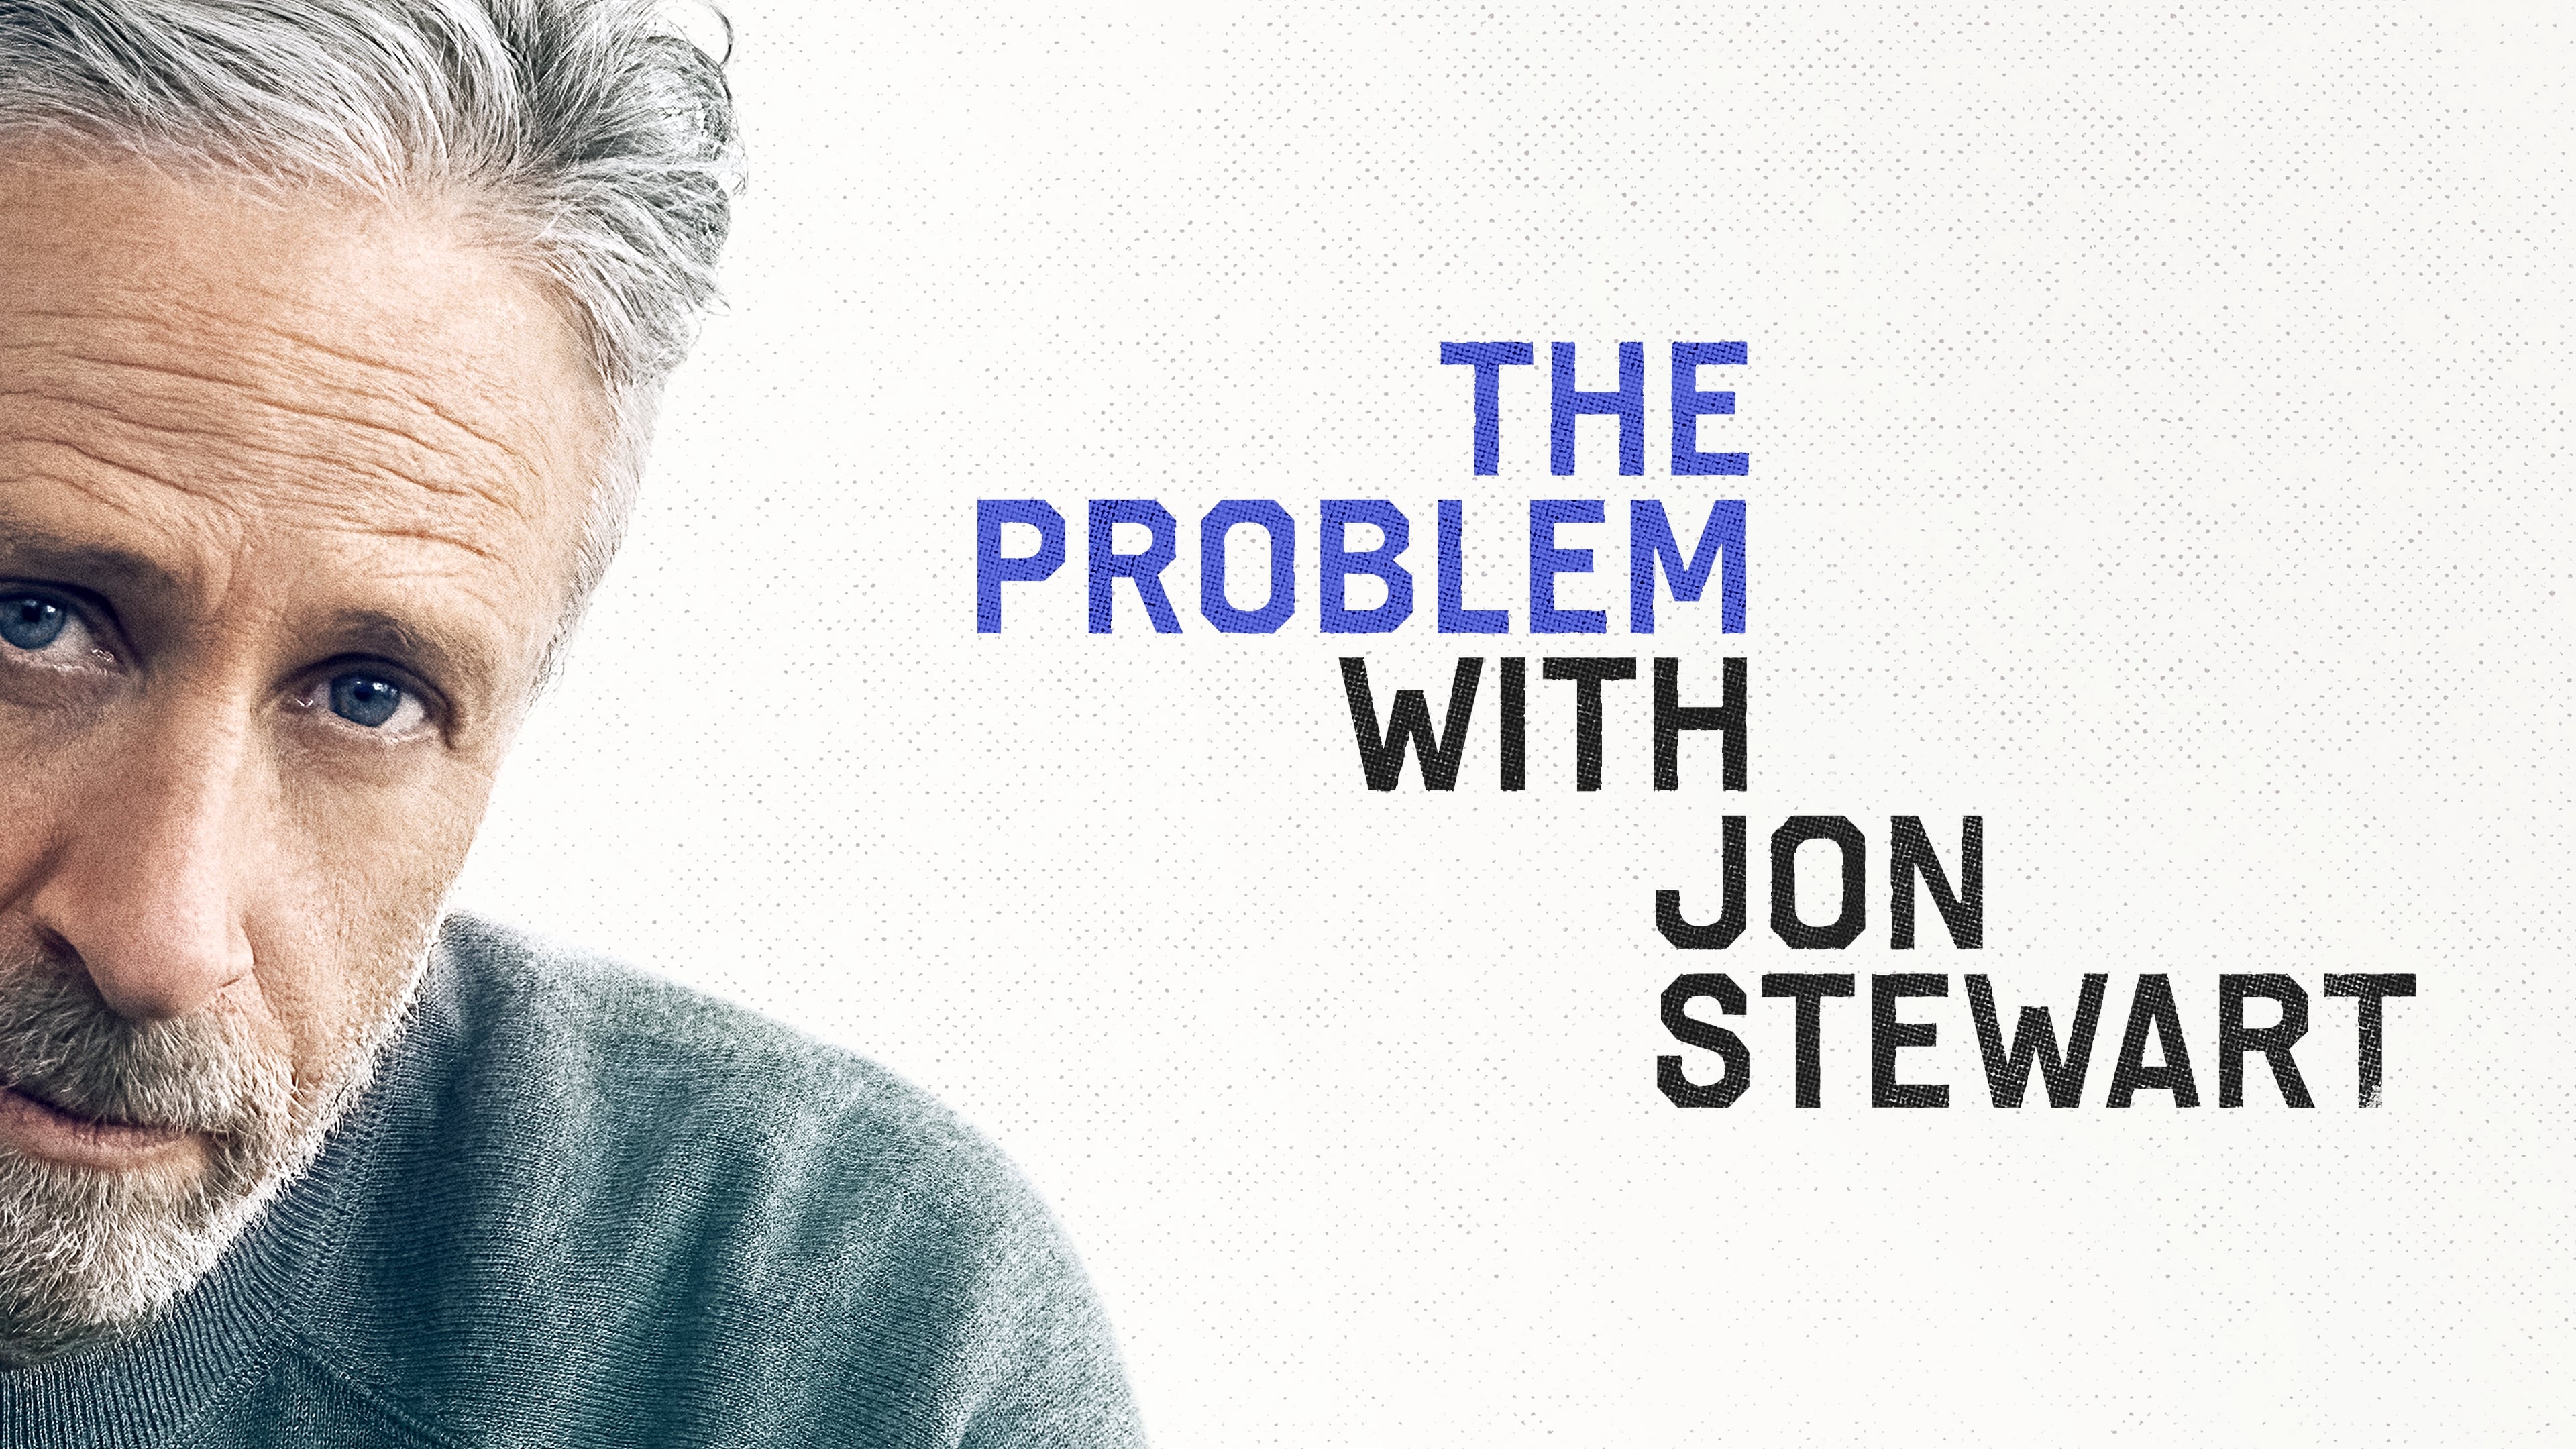 The Problem With Jon Stewart Gallery Image